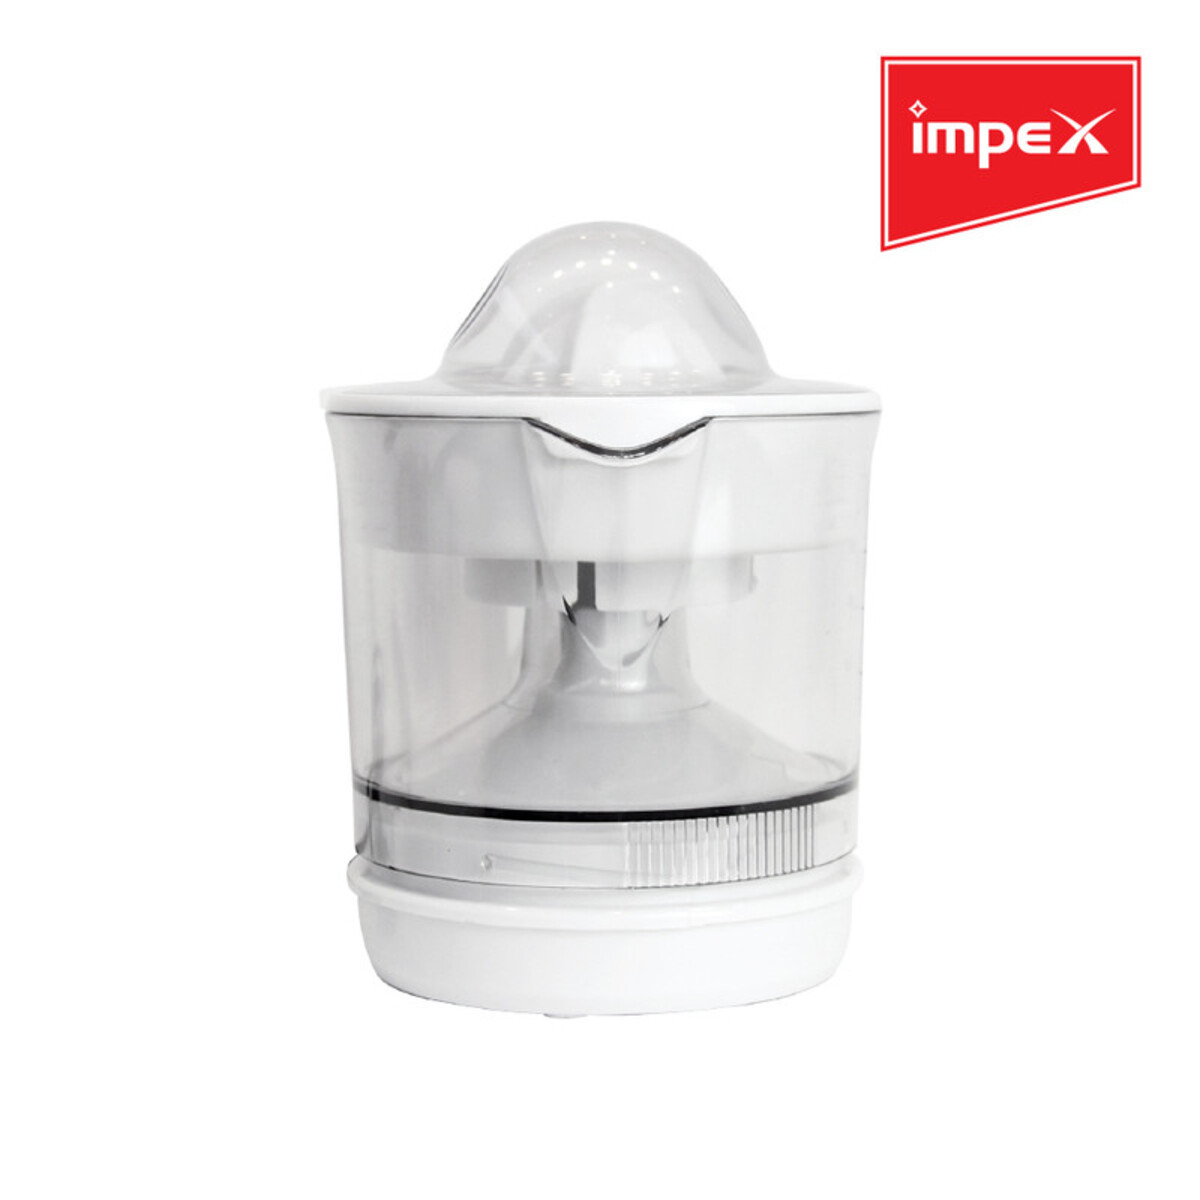 Impex JR 3504 25Watts 750ml Juice Extractor with 100% Copper motor